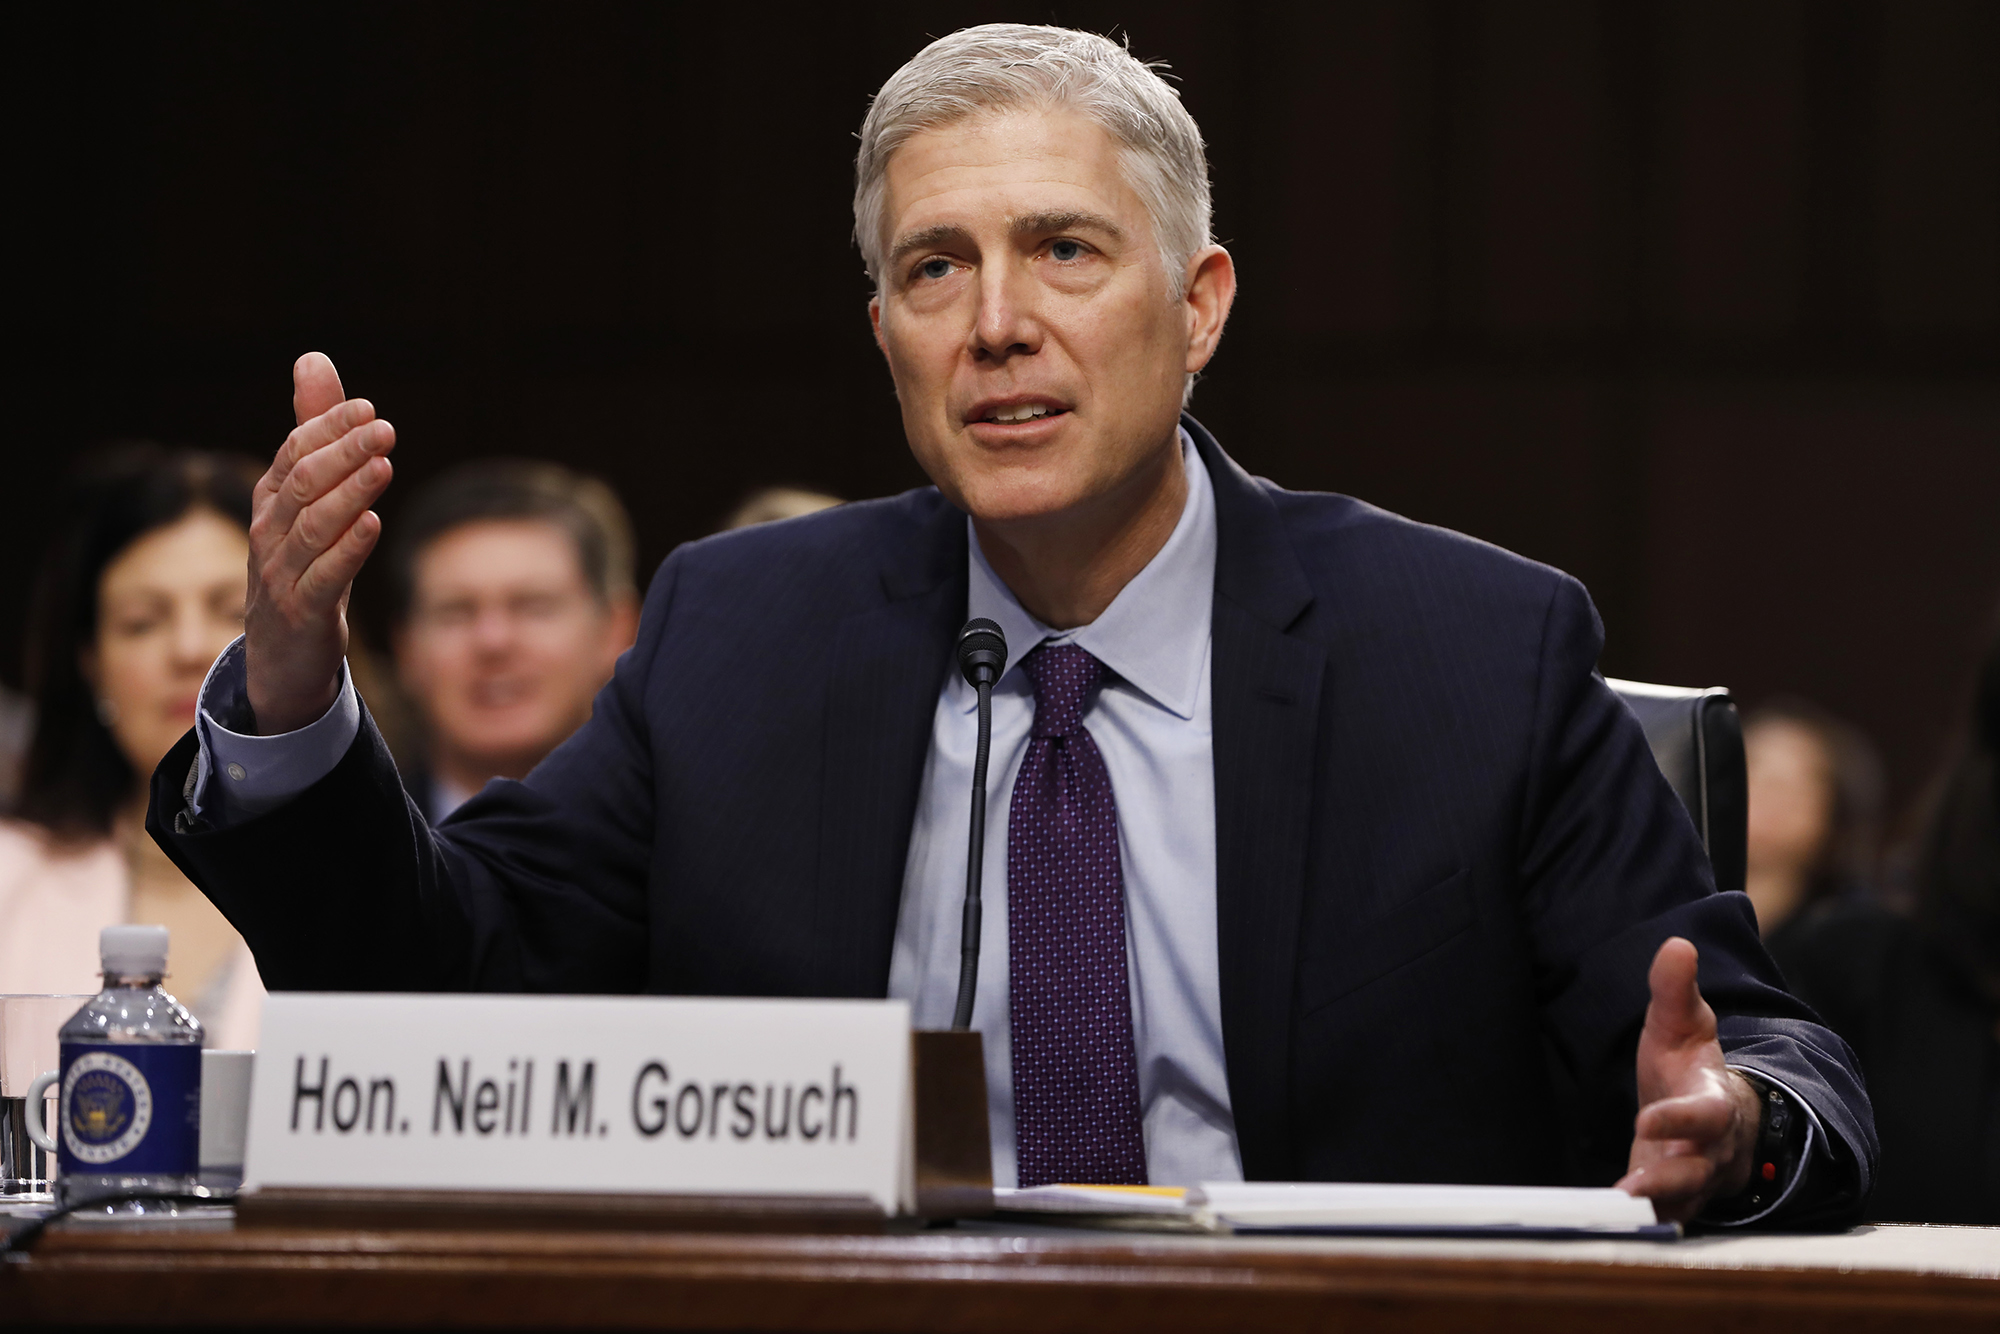 Neil Gorsuch, Supreme Court nominee for Donald Trump, speaks during a Senate Judiciary Committee confirmation hearing in Washington, D.C., on March 21, 2017. (Aaron P. Bernstein—Getty Images)